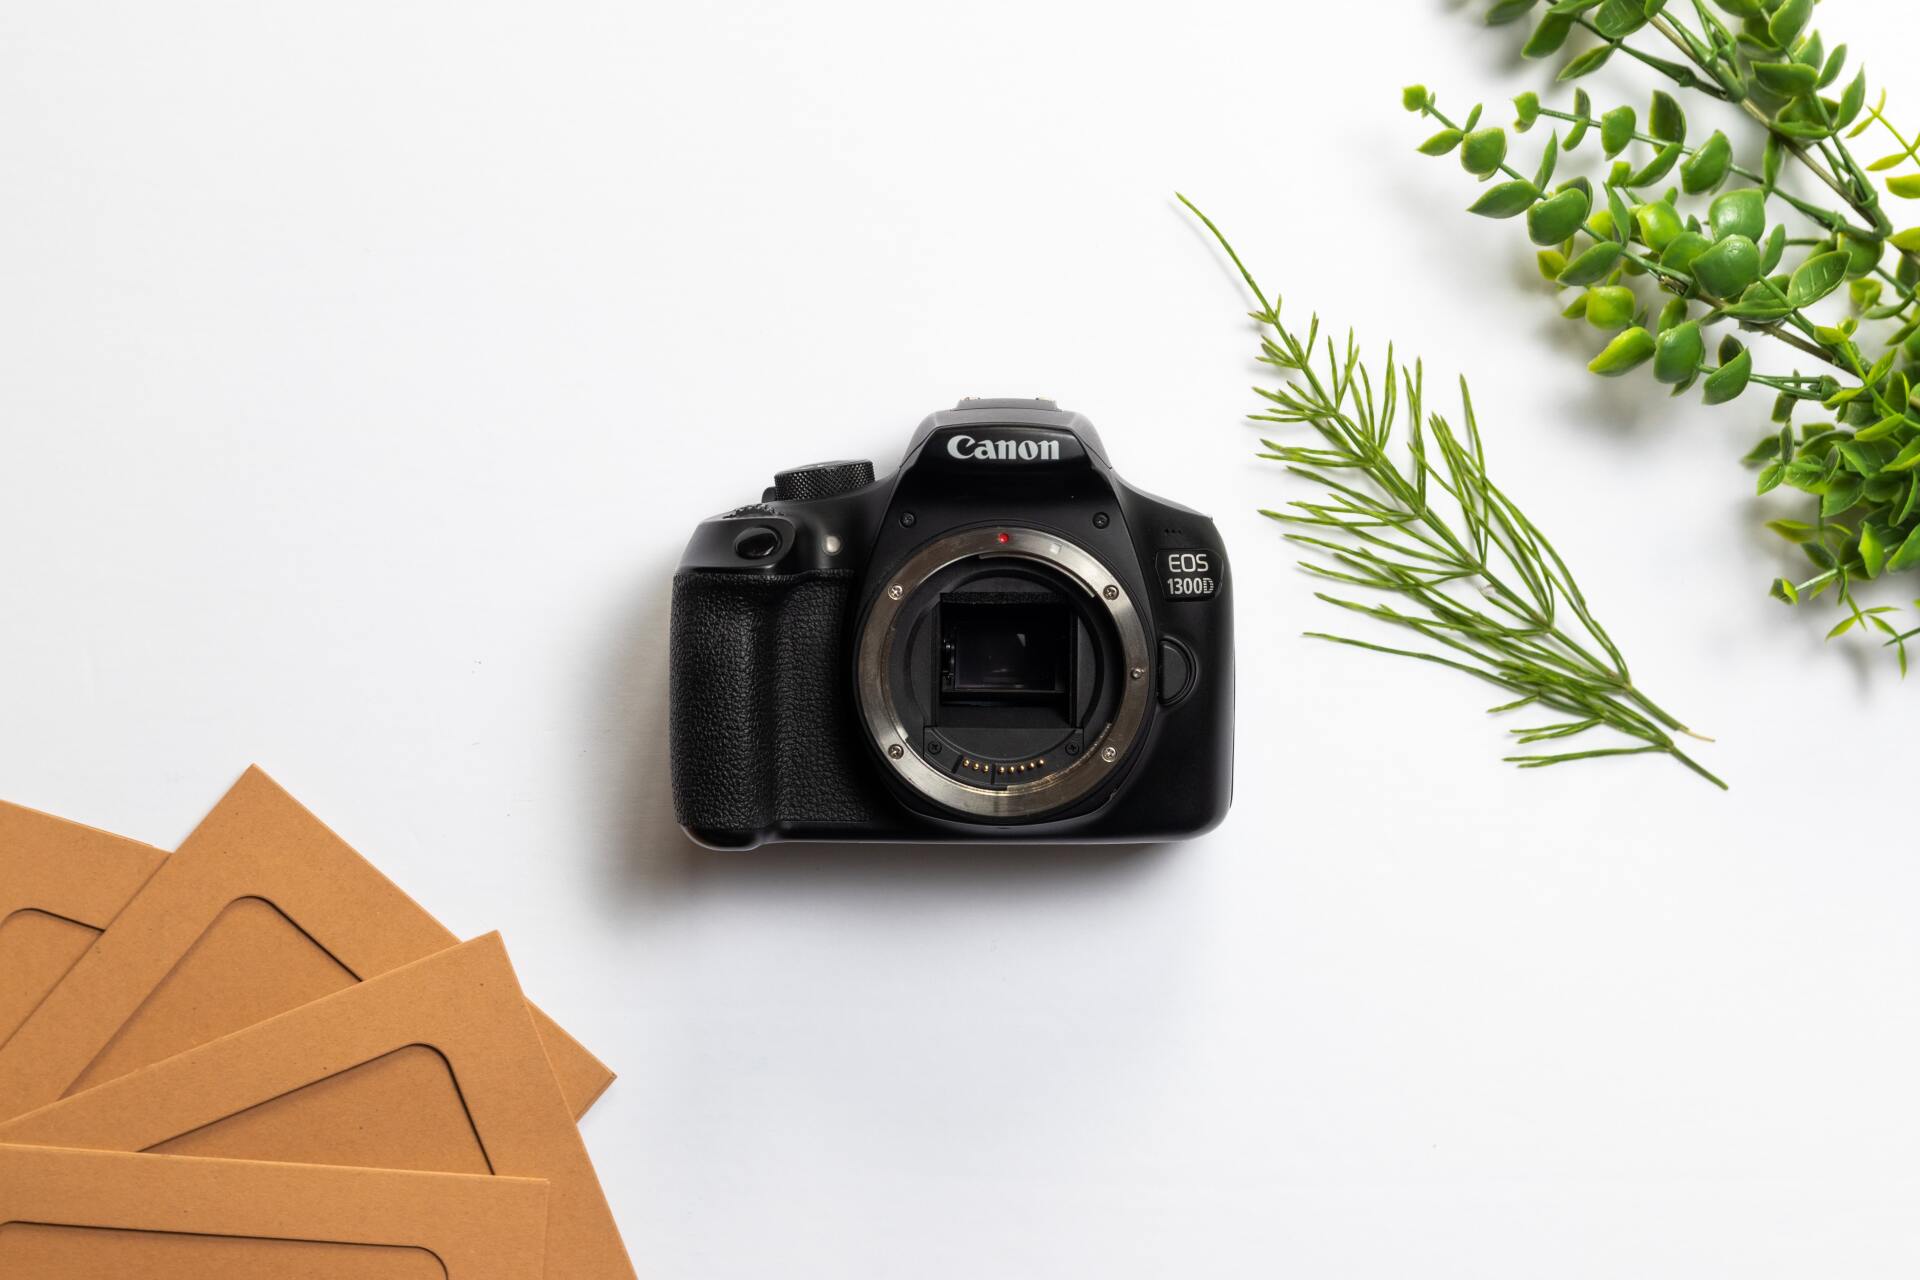 A DSLR Camera on a white background with greenery and cardboard tags